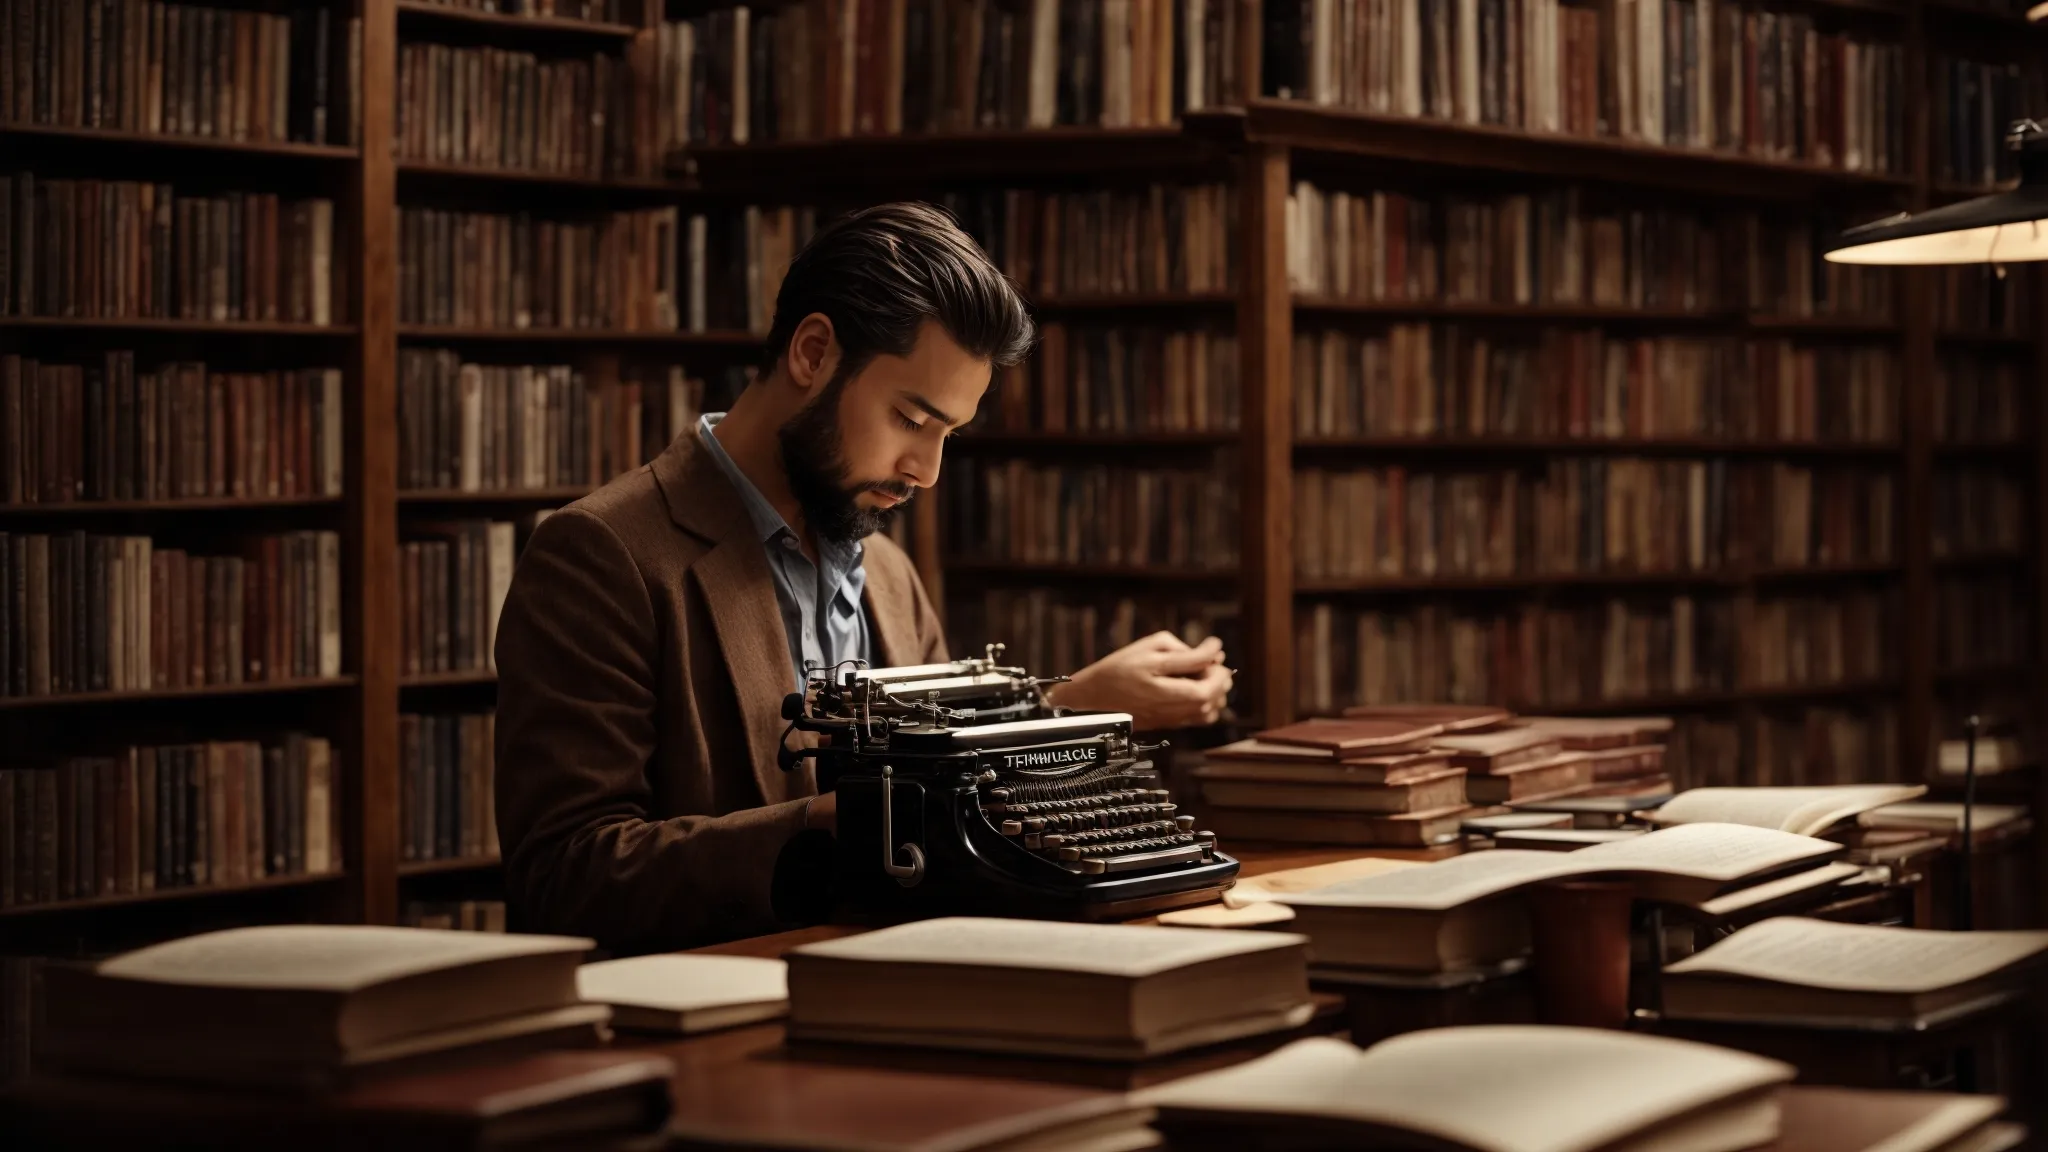 a writer thoughtfully types on a vintage typewriter within a peaceful library setting, surrounded by towering bookshelves laden with tomes of wisdom.